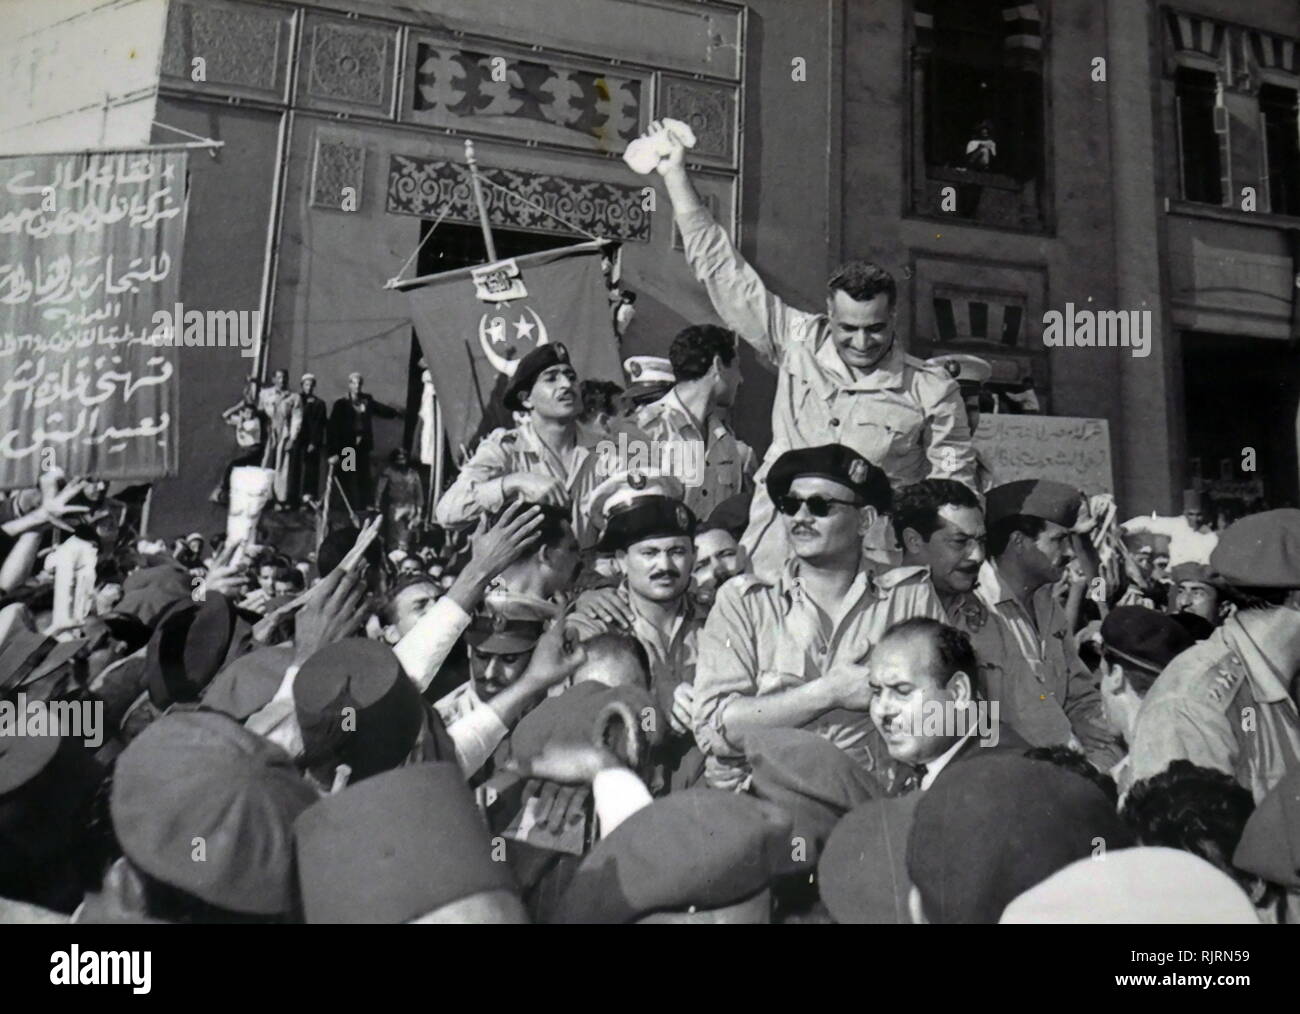 Gamal Abdel Nasser and members of the RCC, welcomed by cheering crowds in Alexandria 1954, after the signing of the British withdrawal order. (Salah Salem seated in front of Nasser with sunglasses), Kamal el-Din Husseini (behind Salem), Anwar Sadat (only partially visible, behind Husseini), Abdel Hakim Amer (standing behind Nasser, face not seen). Gamal Abdel Nasser (1918 - 1970), President of Egypt, serving from 1956 until his death in 1970. Nasser led the 1952 overthrow of the monarchy and introduced far-reaching land reforms the following year Stock Photo